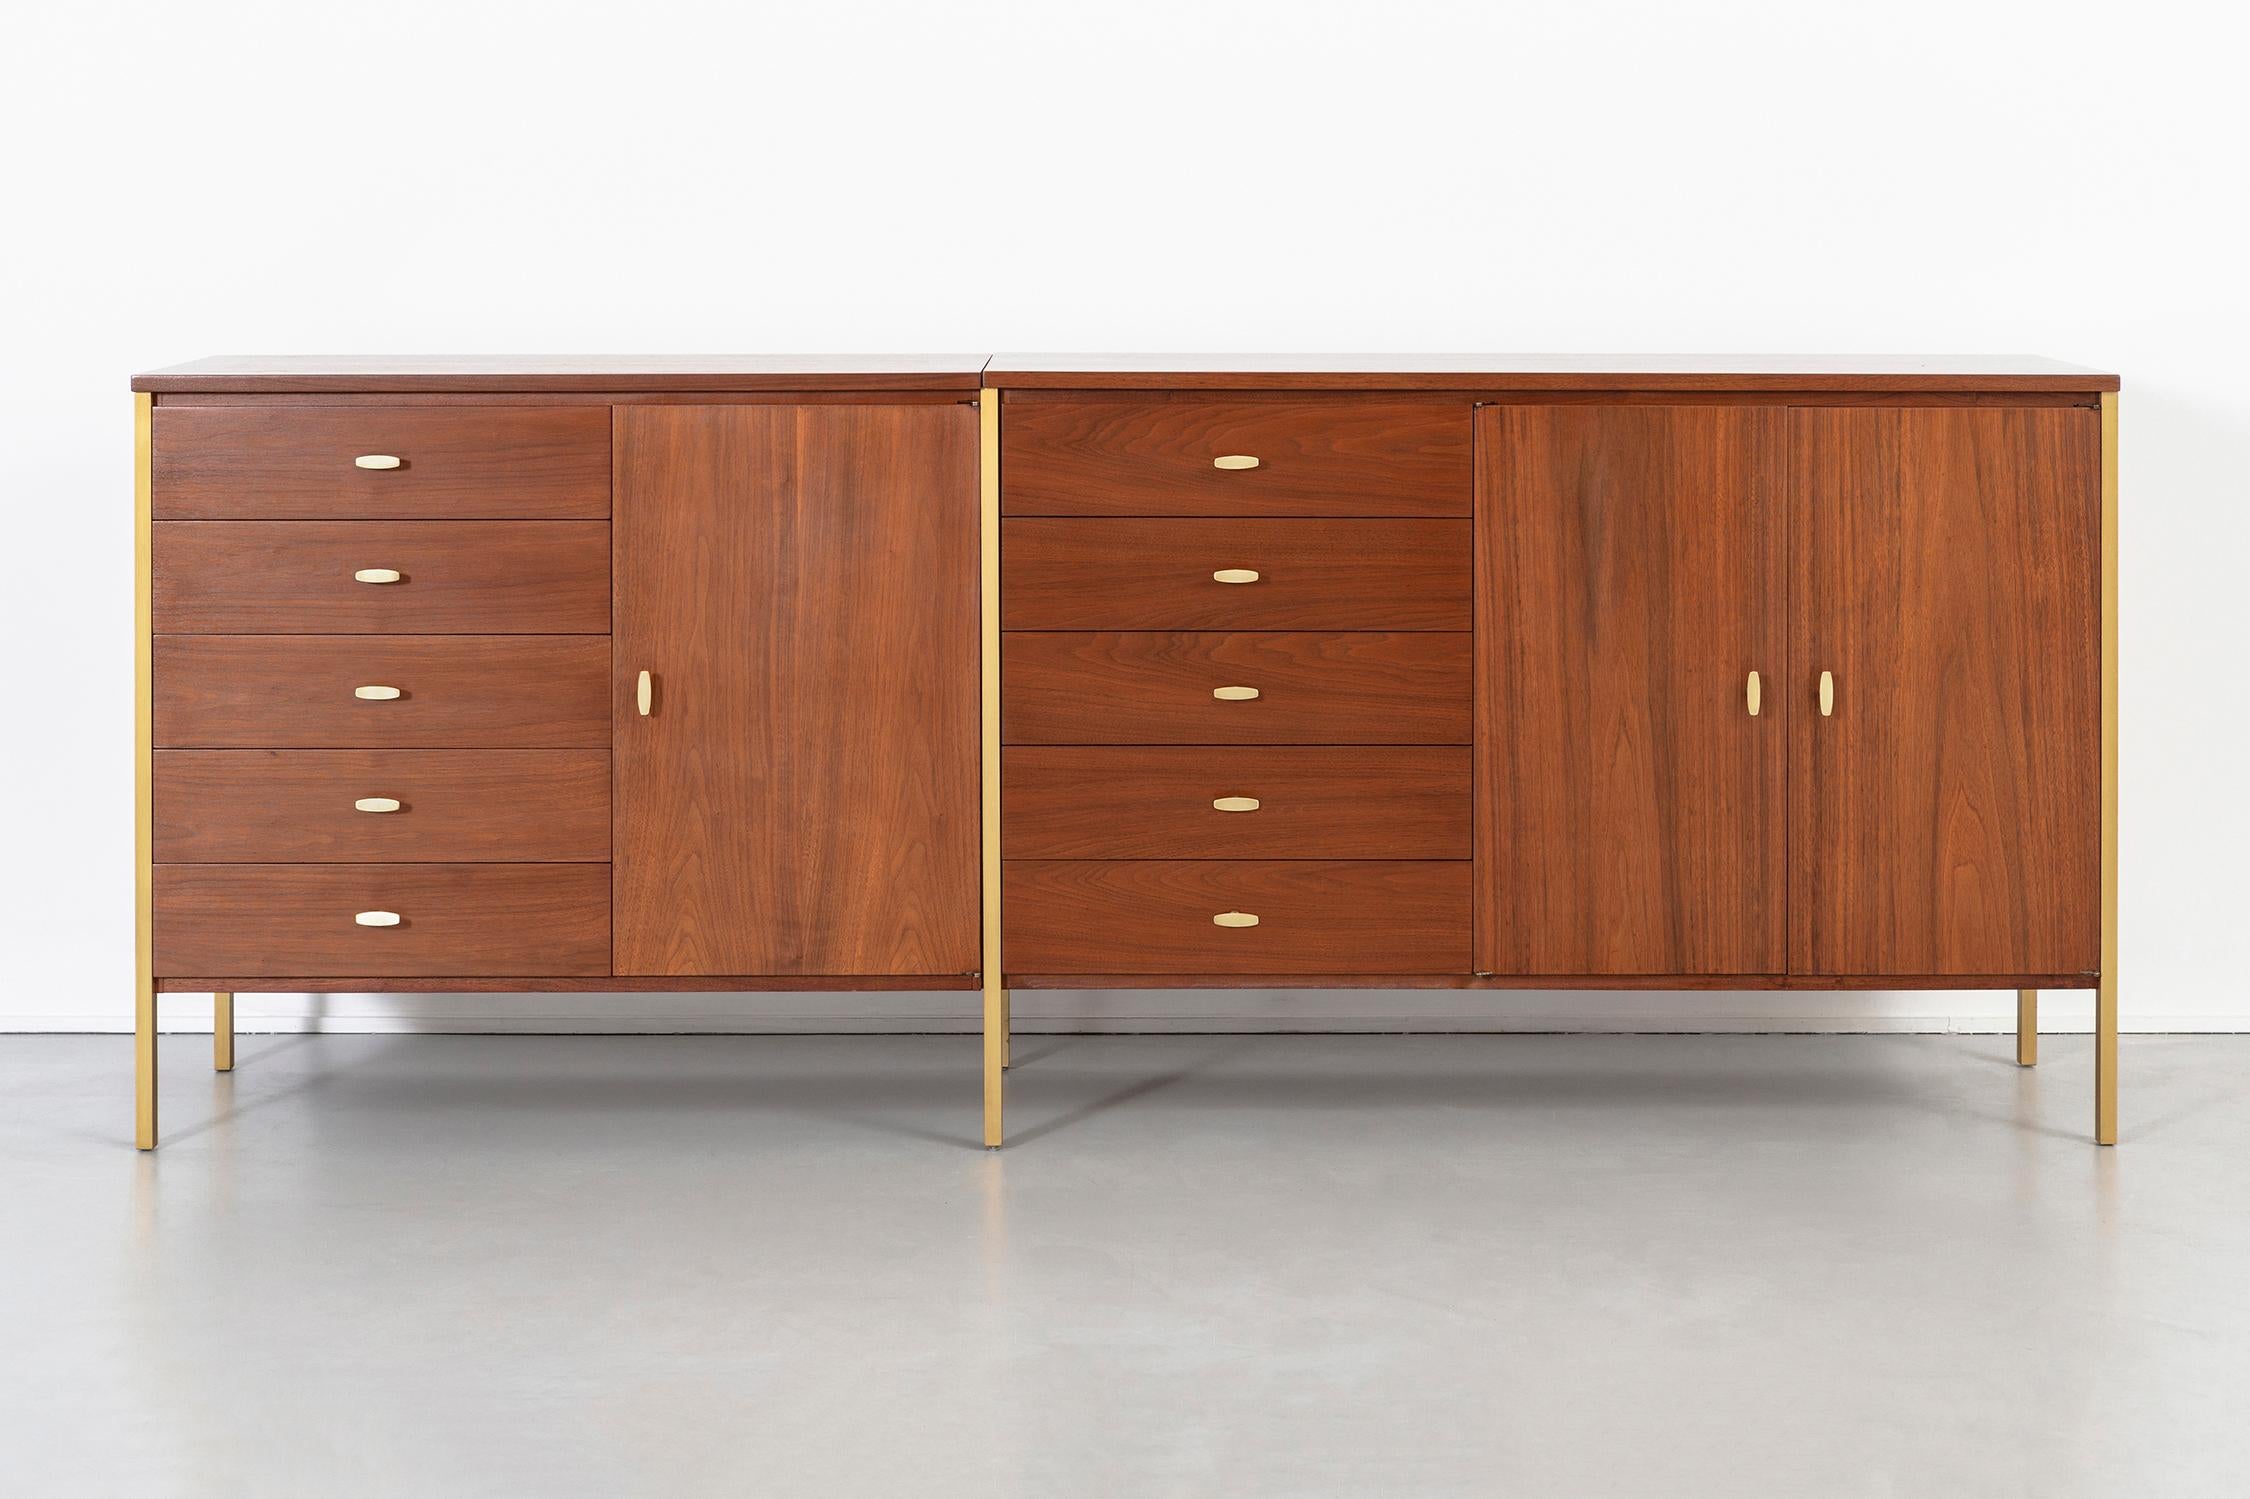 Credenza

Designed by Paul McCobb Living Wall Collection for H. Sacks and Sons

USA, circa 1958.

Walnut and brass

Measures: 32 ¼” H x 68” W x 21 ¼” D.